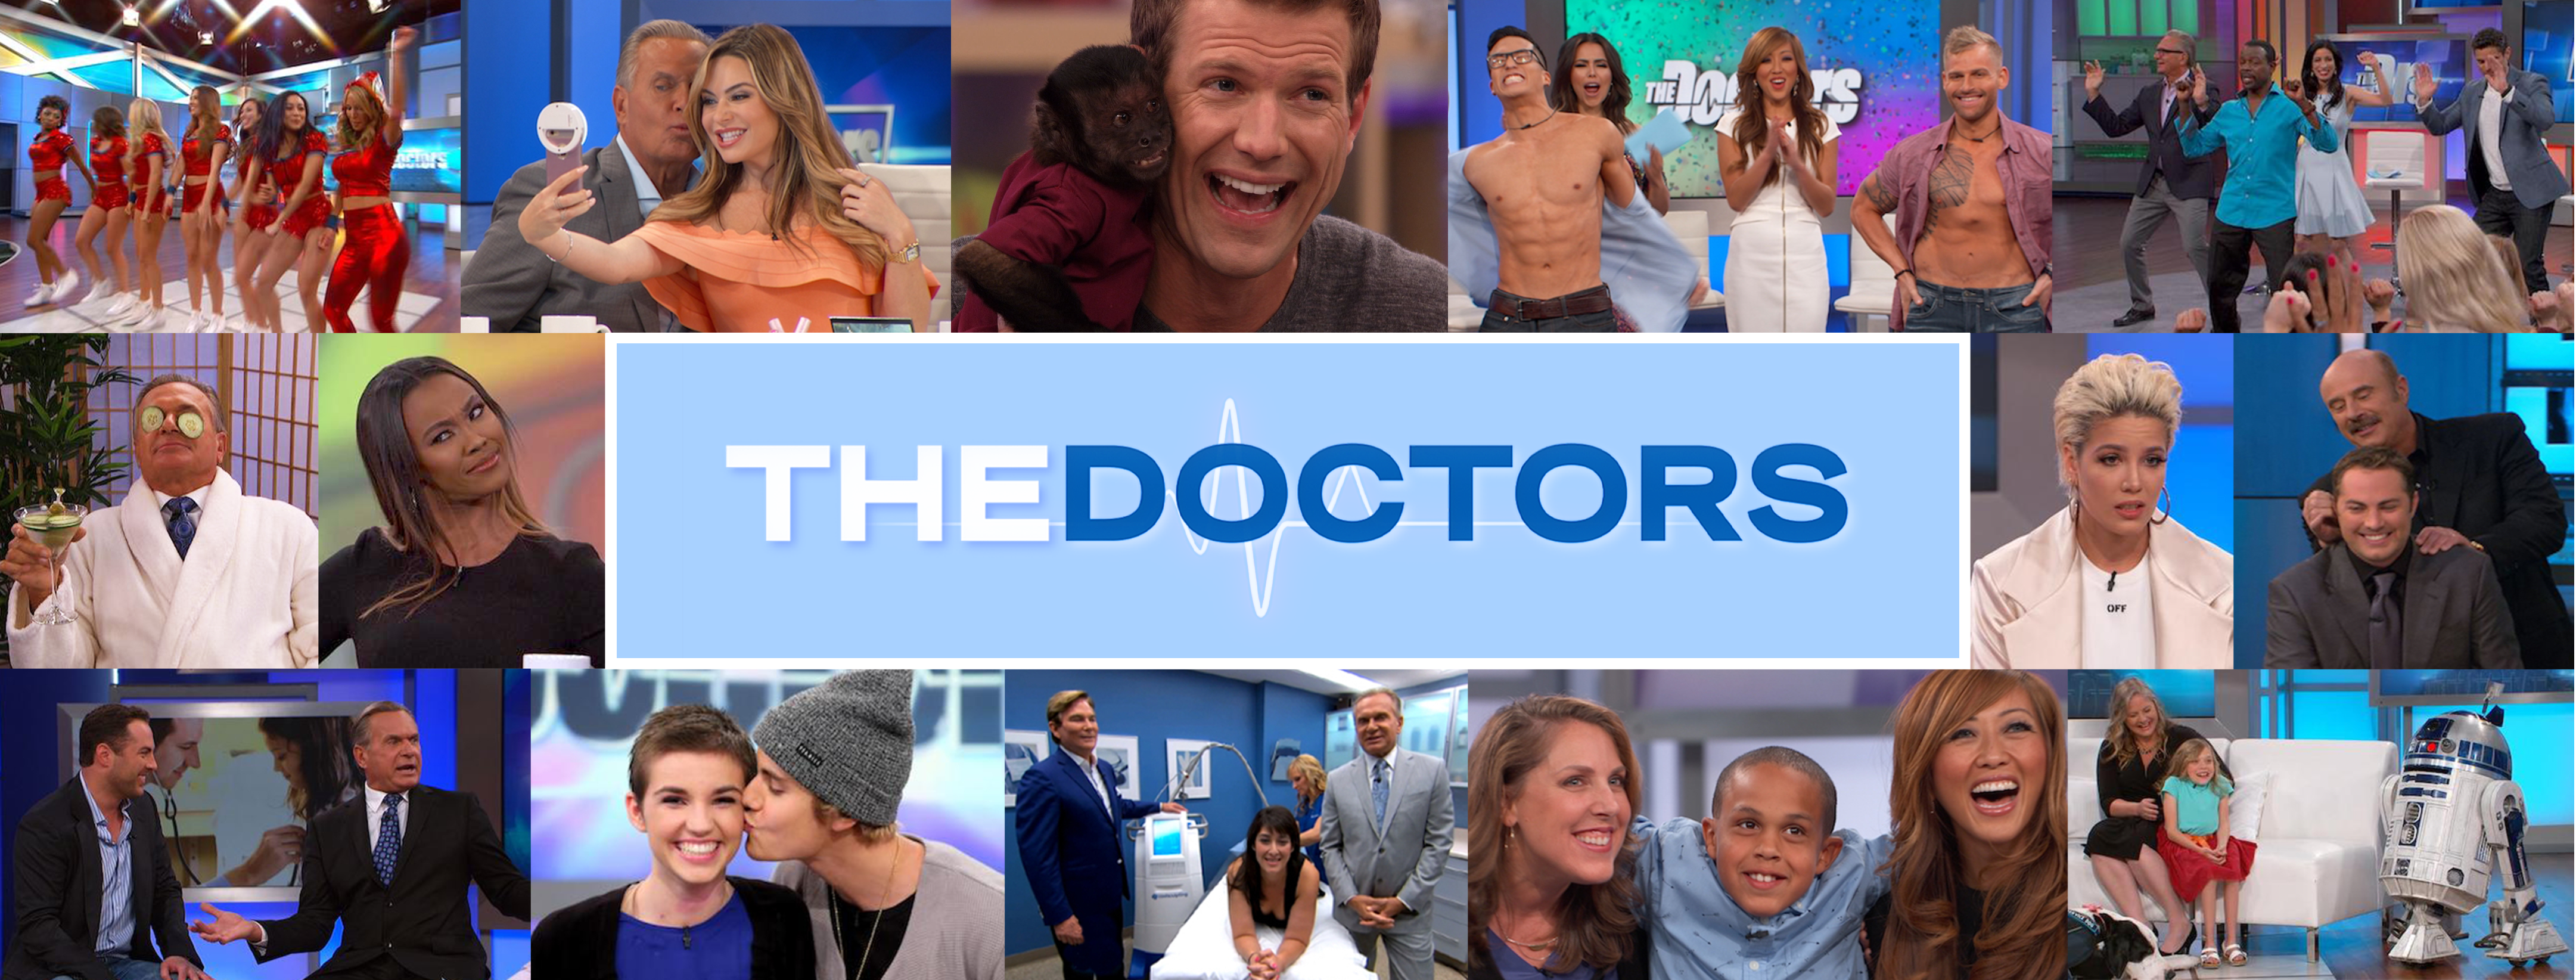 Have Any Of The Doctors Ever Faked An Orgasm The Doctors TV Show